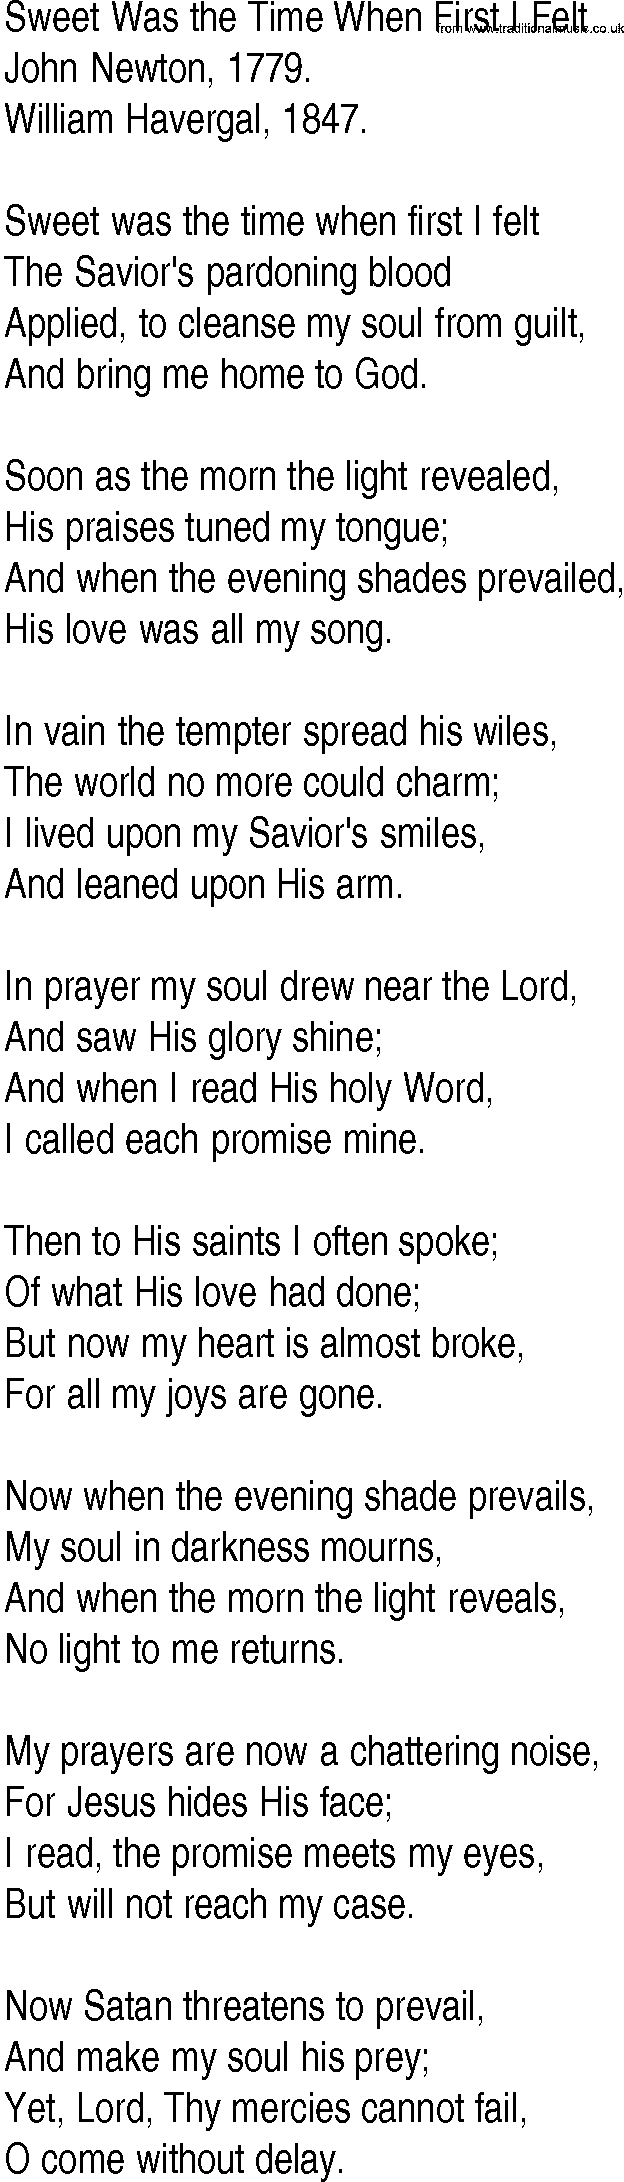 Hymn and Gospel Song: Sweet Was the Time When First I Felt by John Newton lyrics